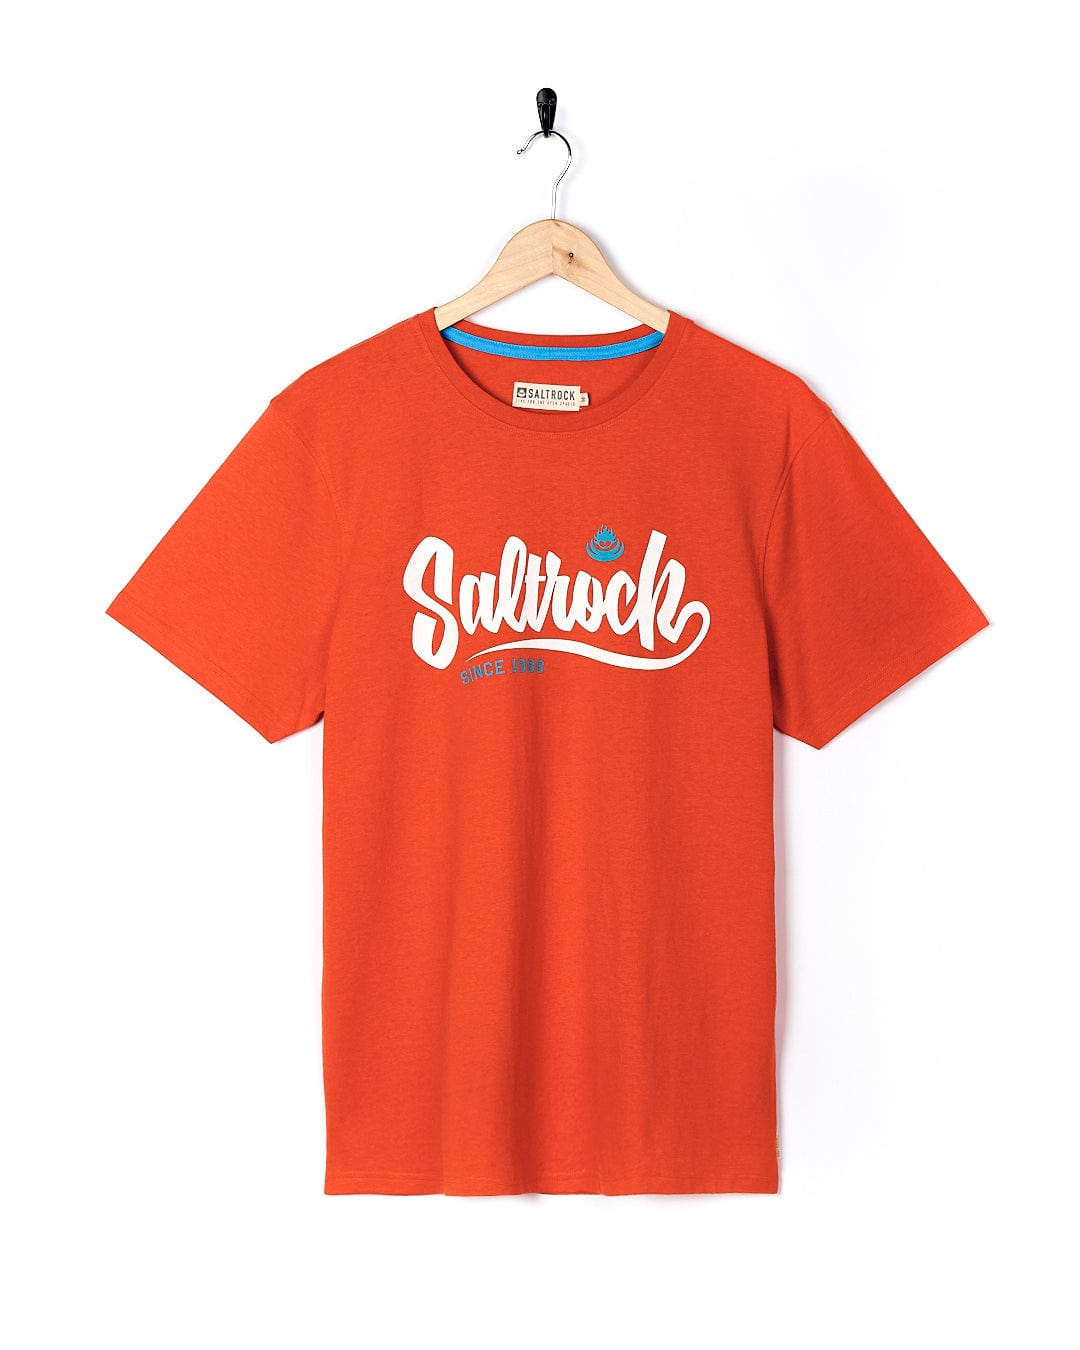 A Speed - Mens Short Sleeve T-Shirt - Red with the word Saltrock on it.